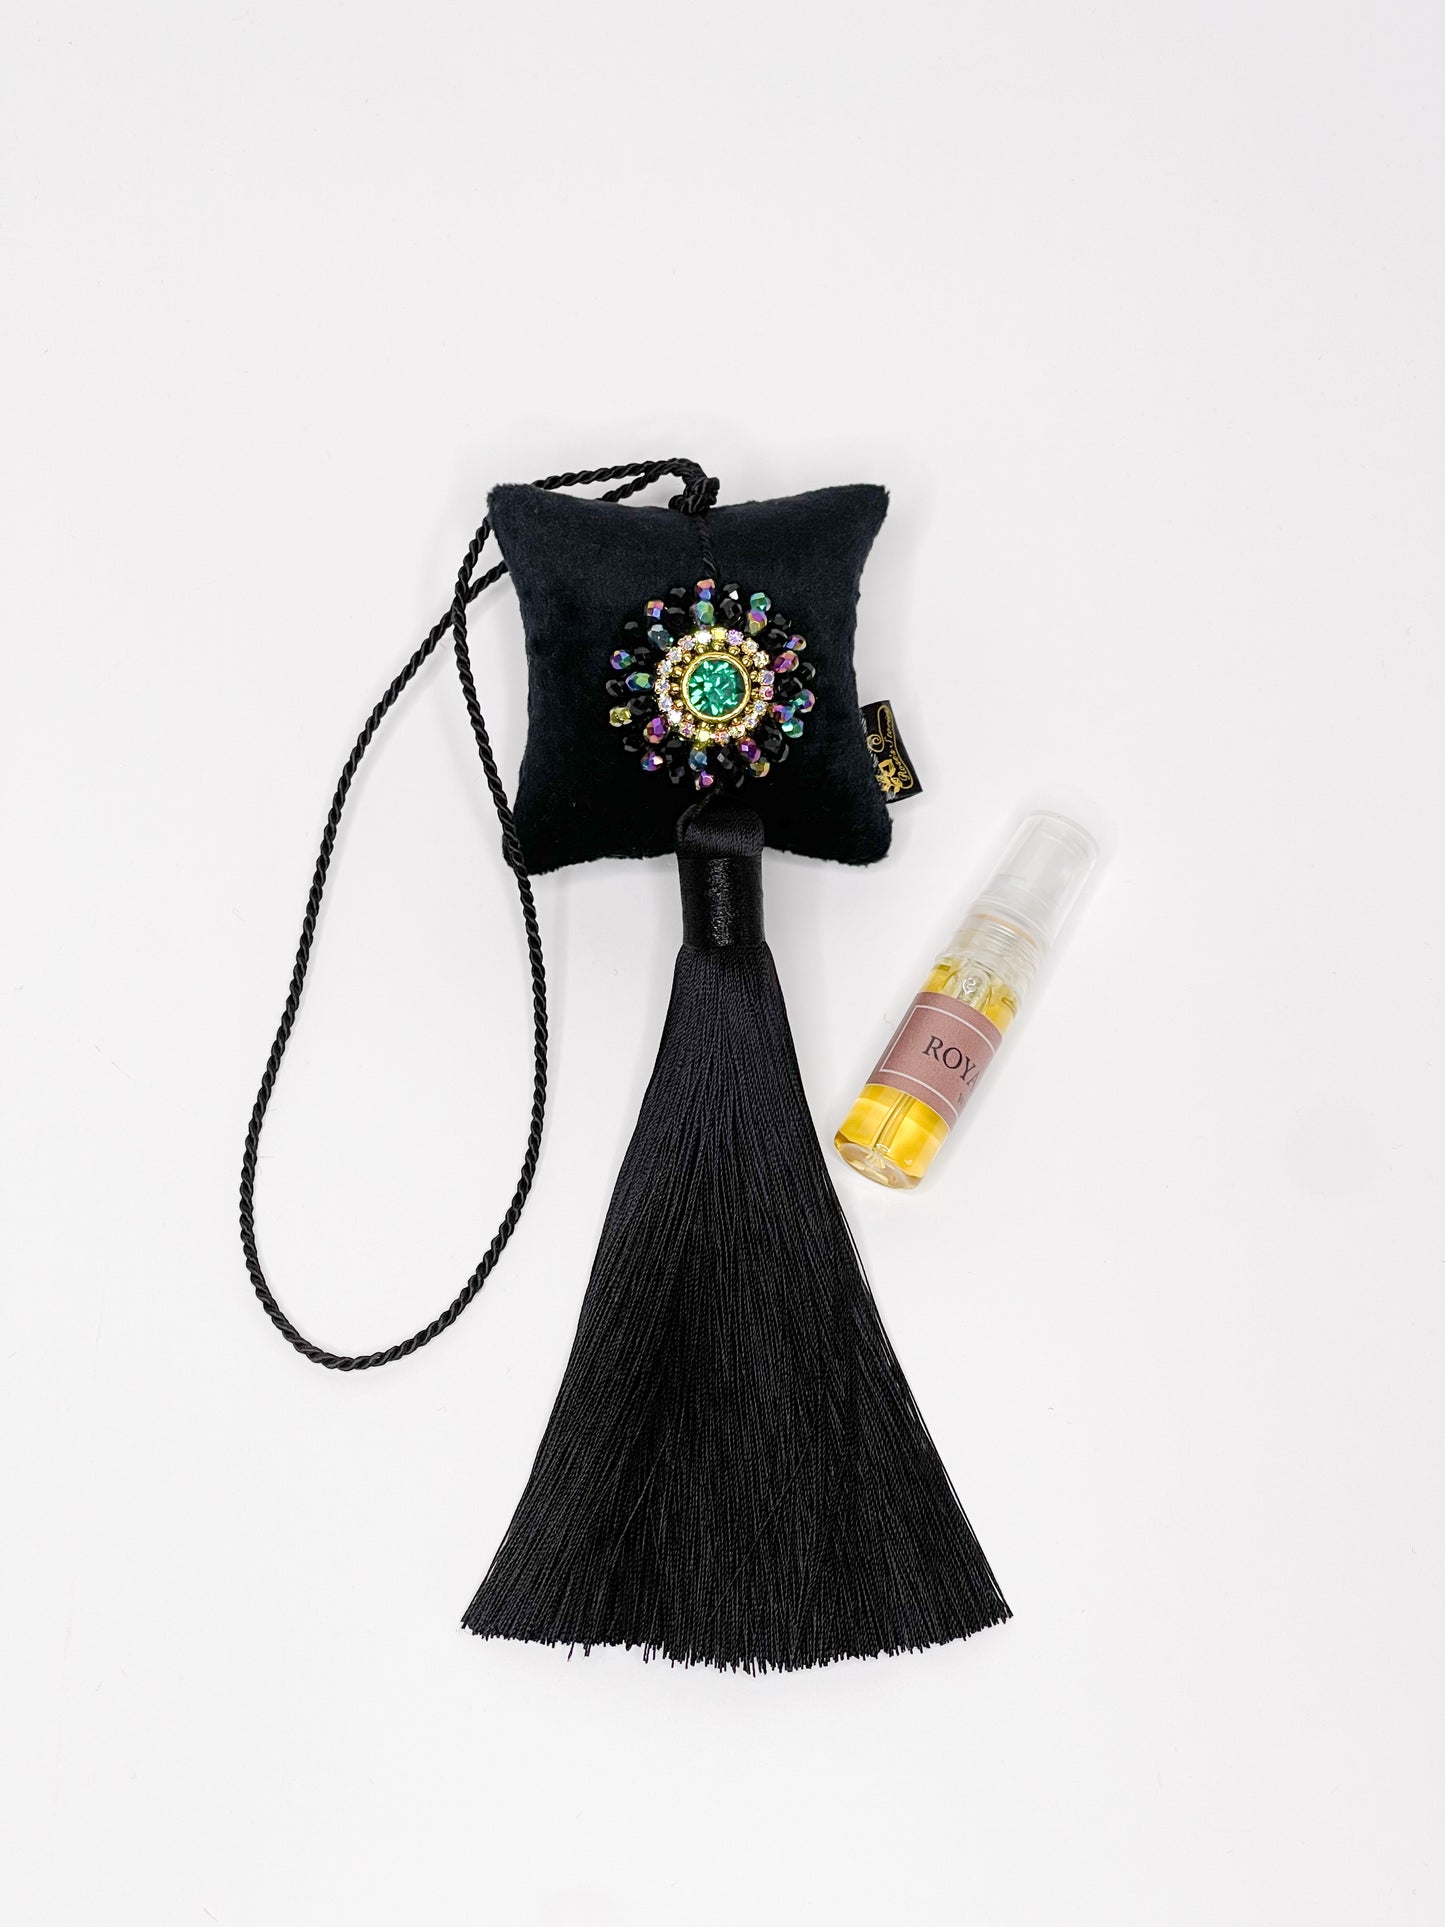 Hanging fragrance with sparkling crystals and long tassel.